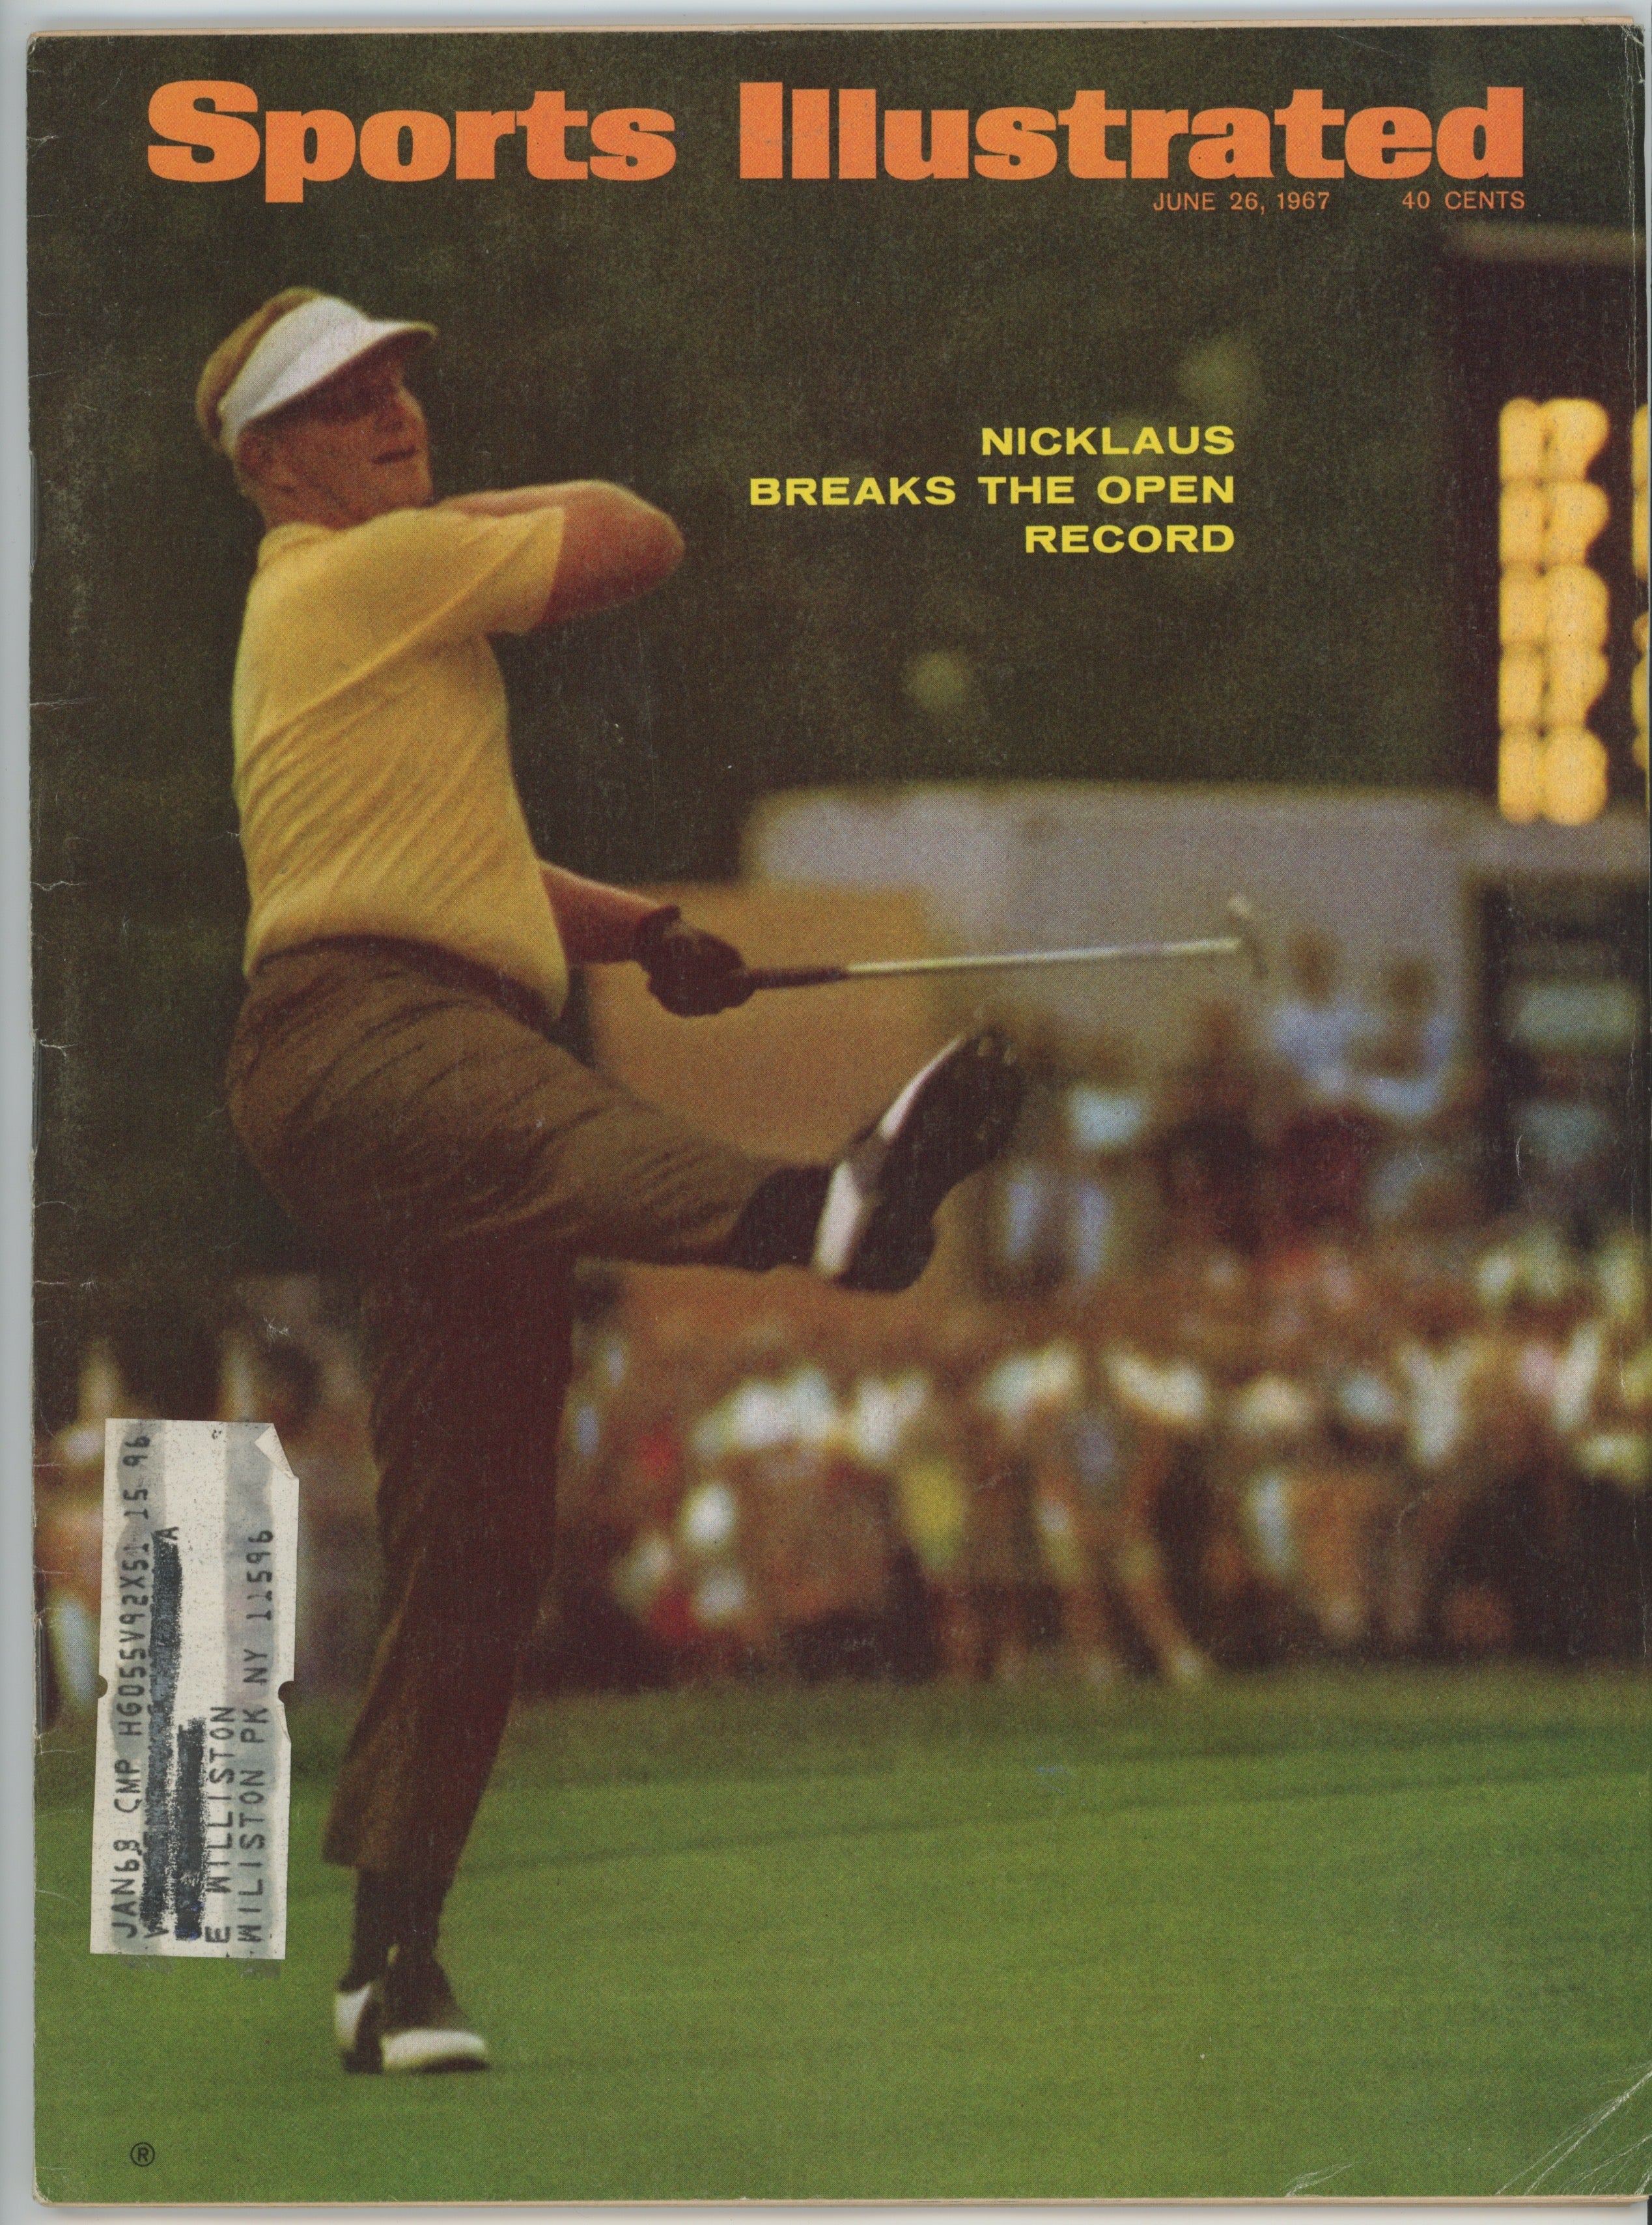 Jack Nicklaus “Nicklaus Breaks The Open record” 6/26/67 EX ML